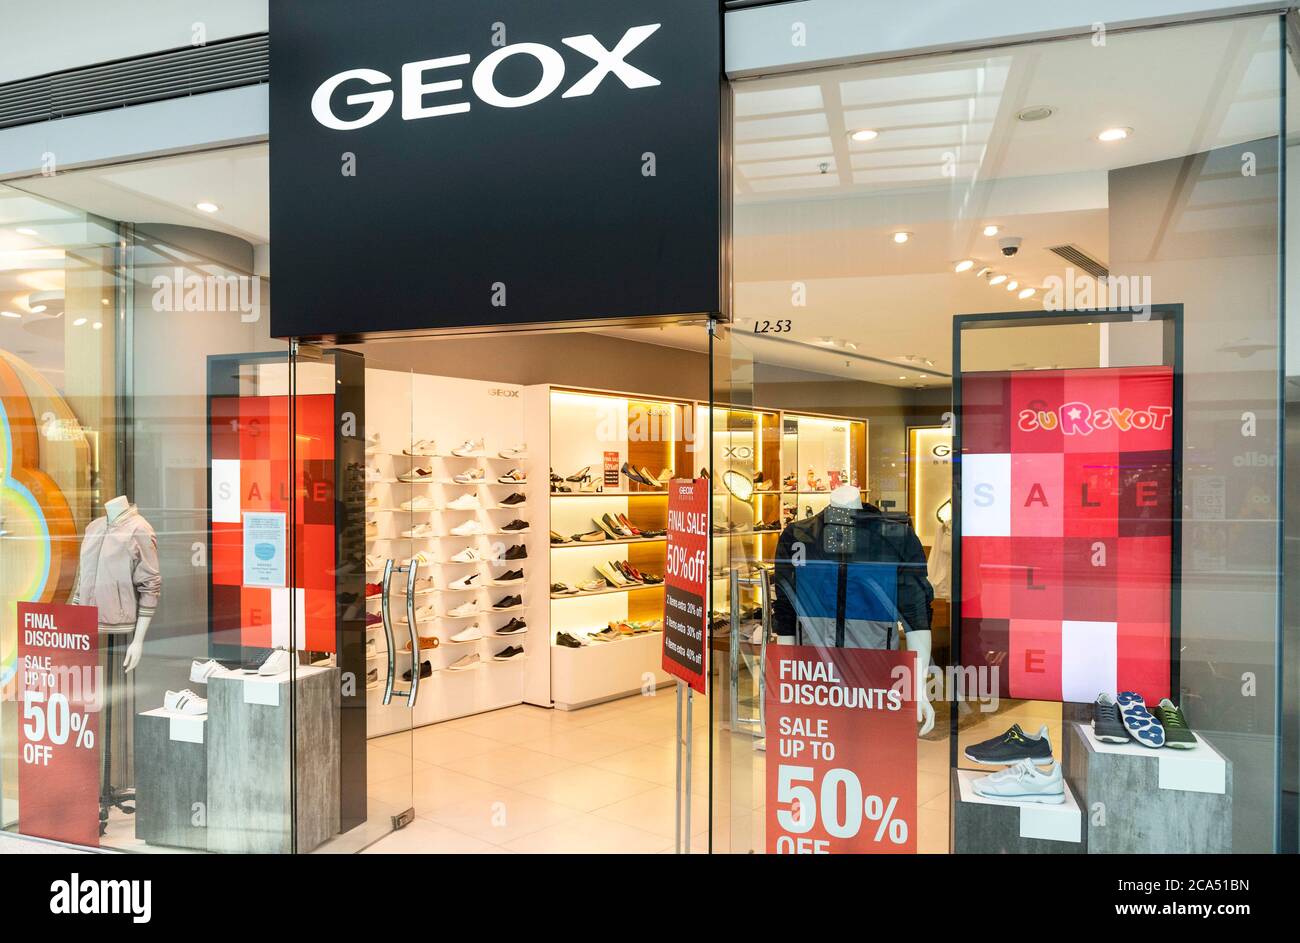 Geox Baratos Outlet Sale Discounted, 53% OFF | asrehazir.com